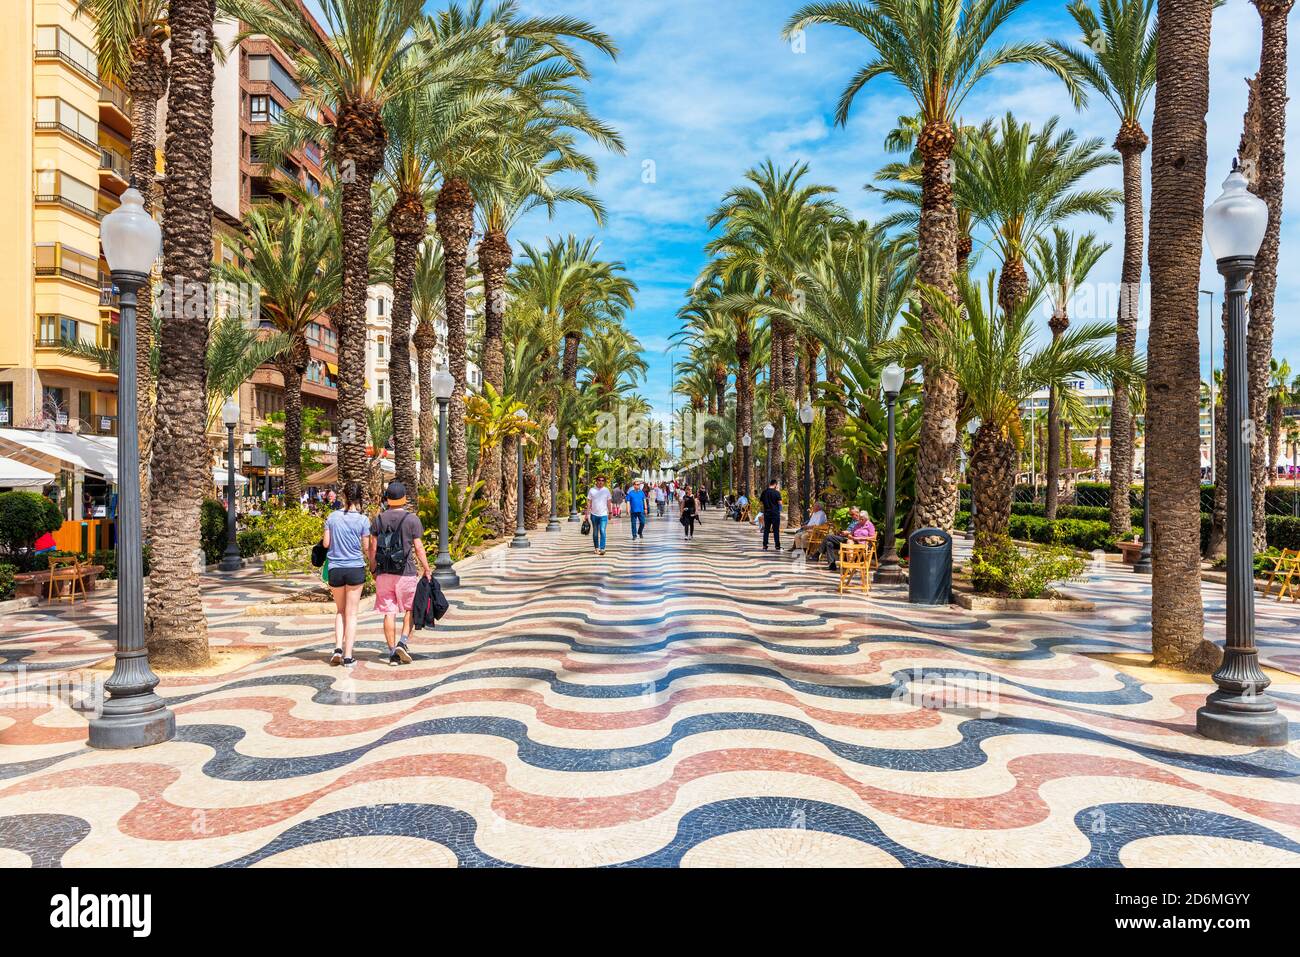 People walking on a palm-lined promenade in Alicante, Spain. Alicante is a city located in the southeast of the Iberian Peninsula. Stock Photo